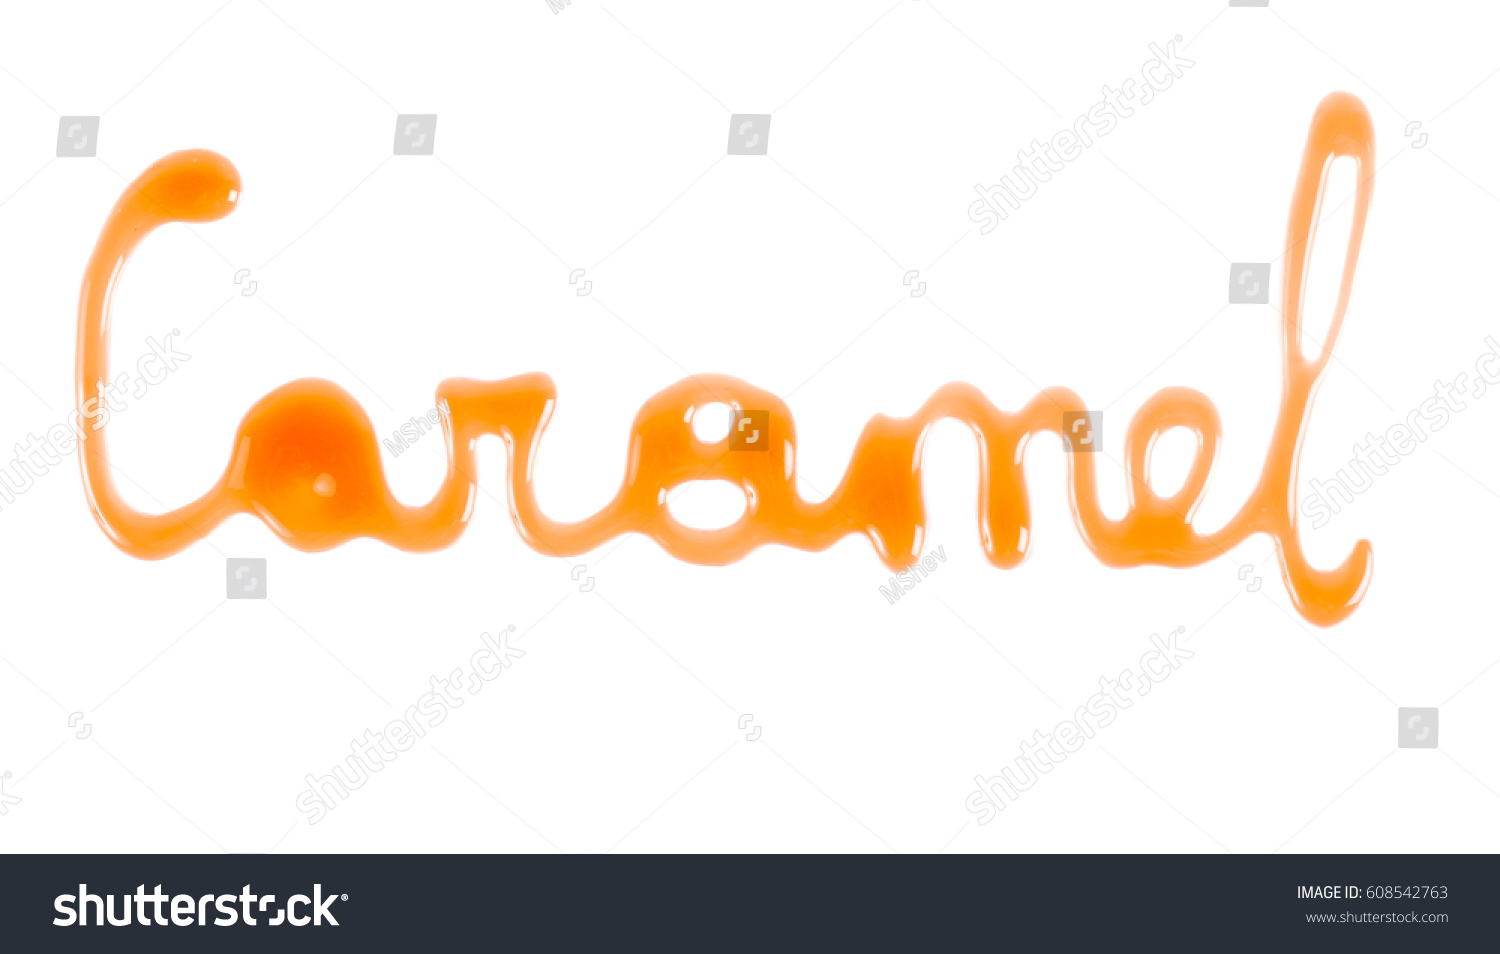 Word Caramel written with caramel sauce over white background #608542763